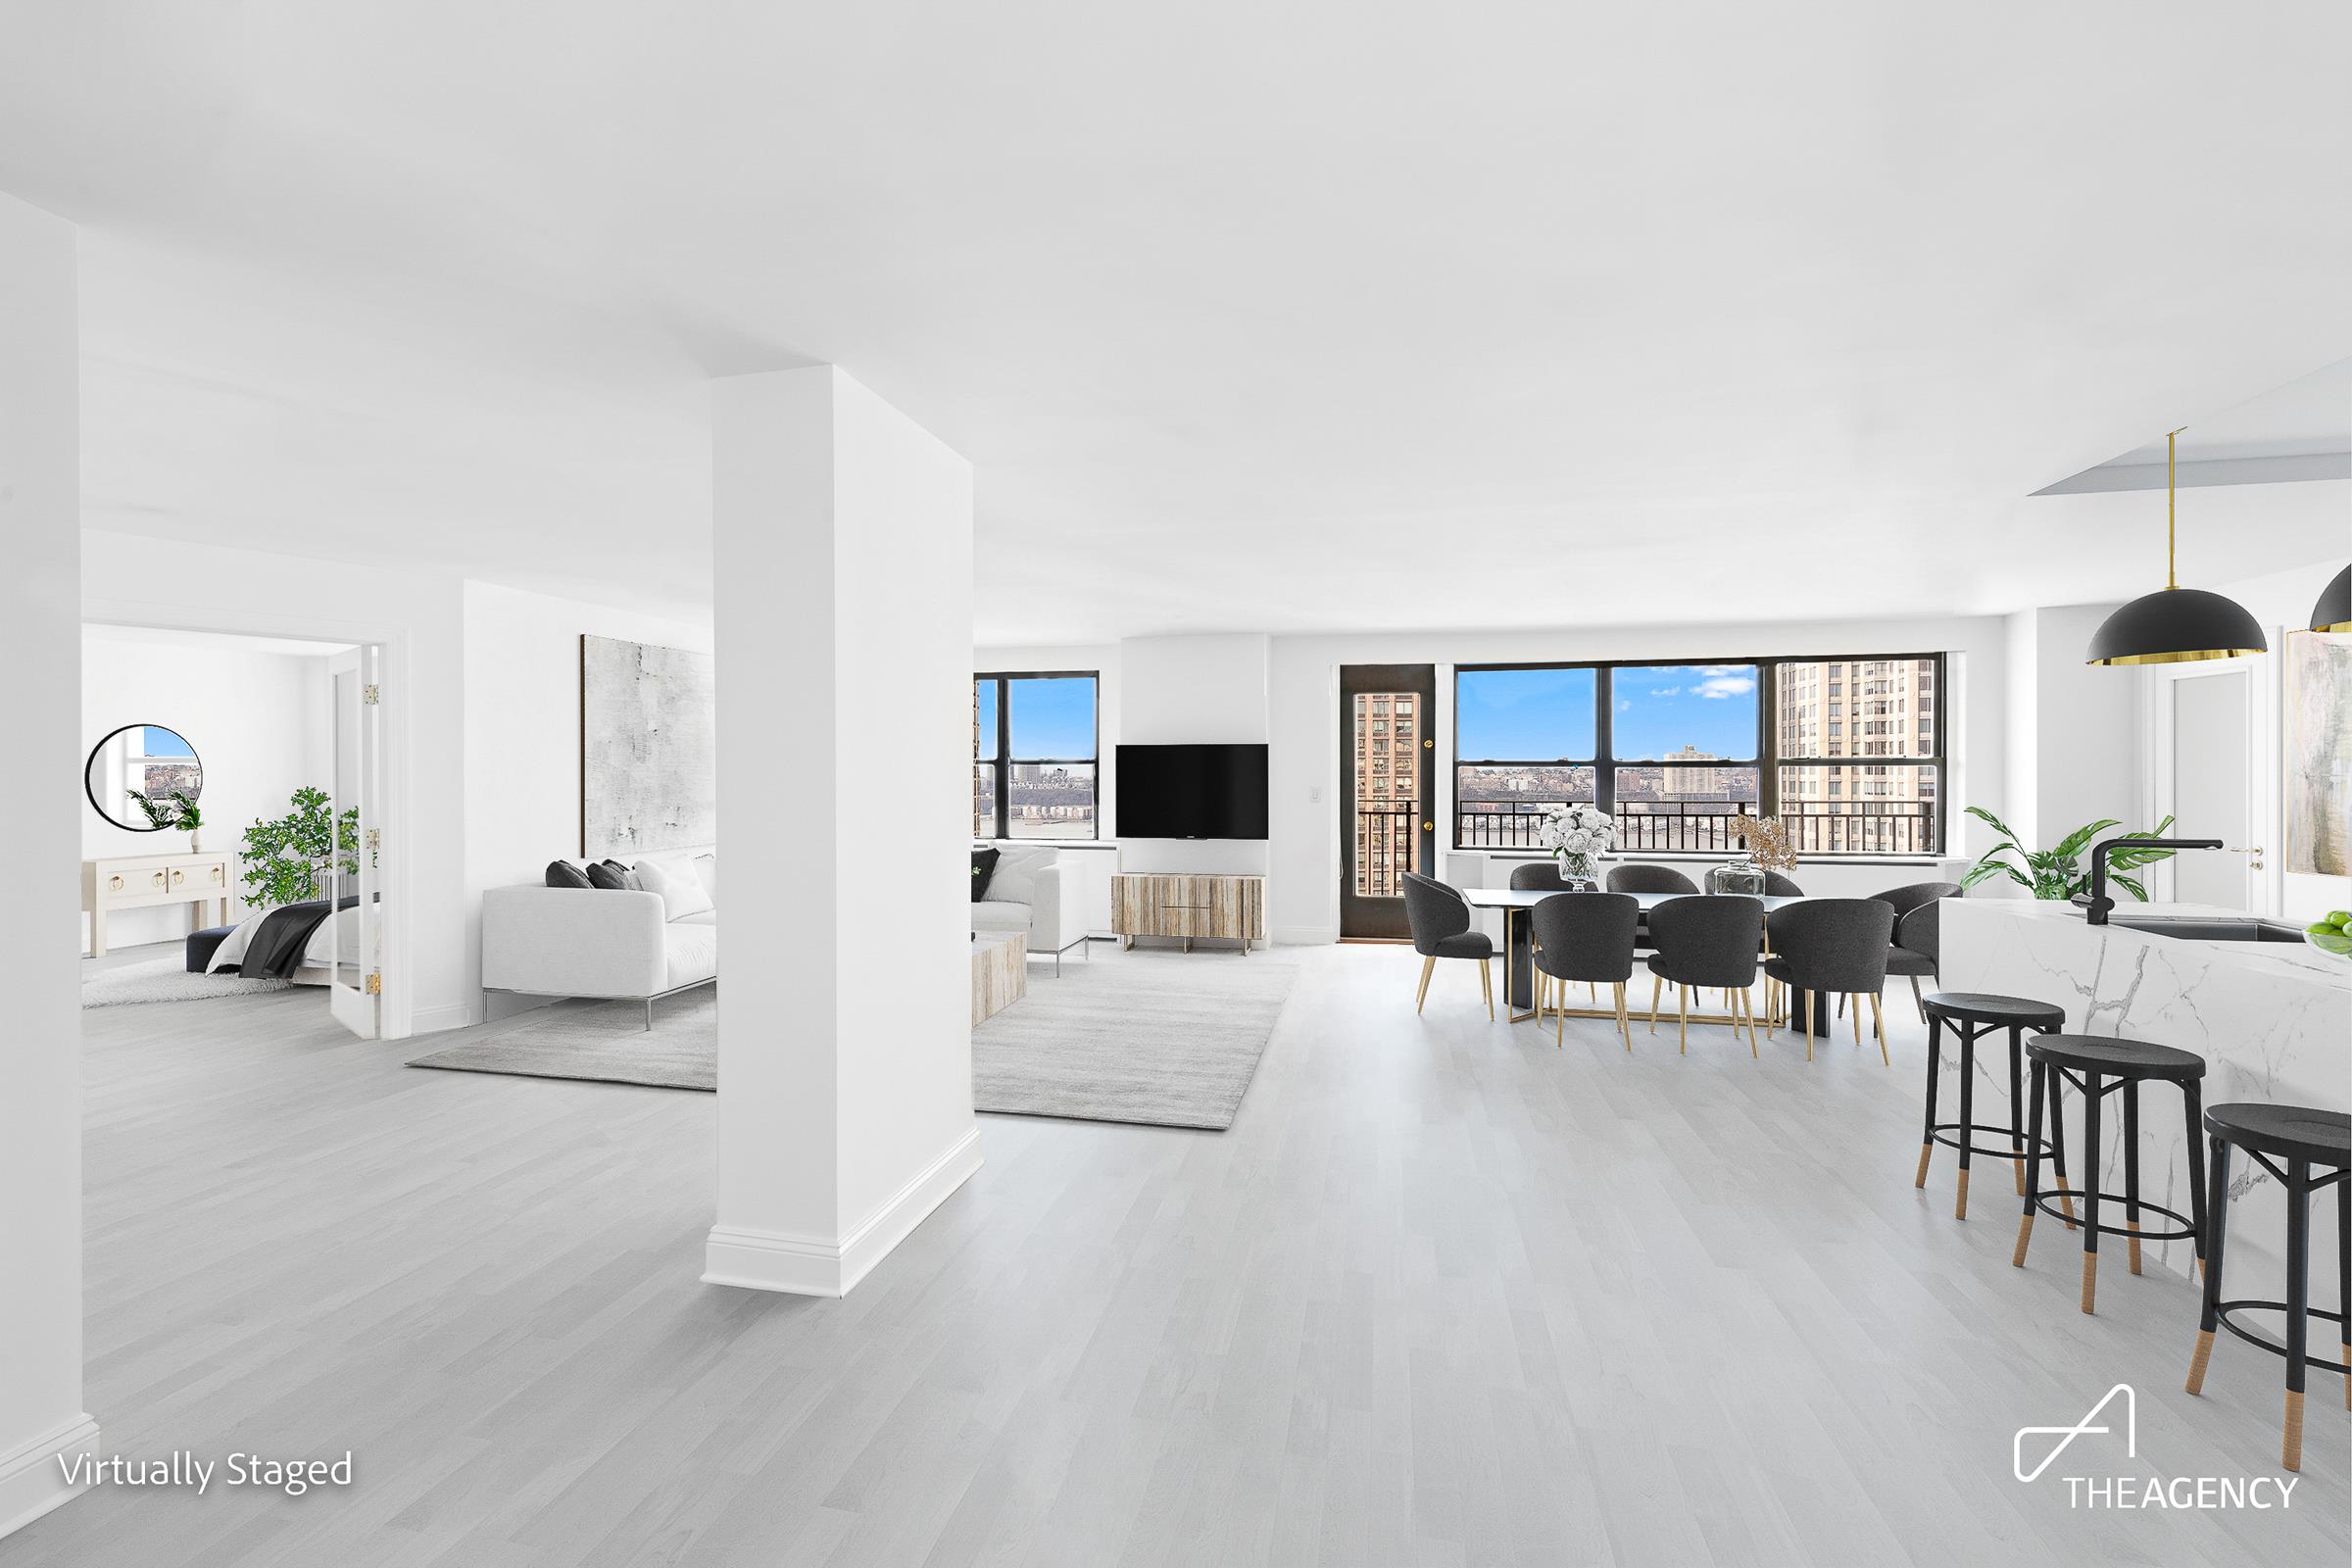 185 West End Avenue 28-Ab, Lincoln Square, Upper West Side, NYC - 3 Bedrooms  
3 Bathrooms  
7 Rooms - 